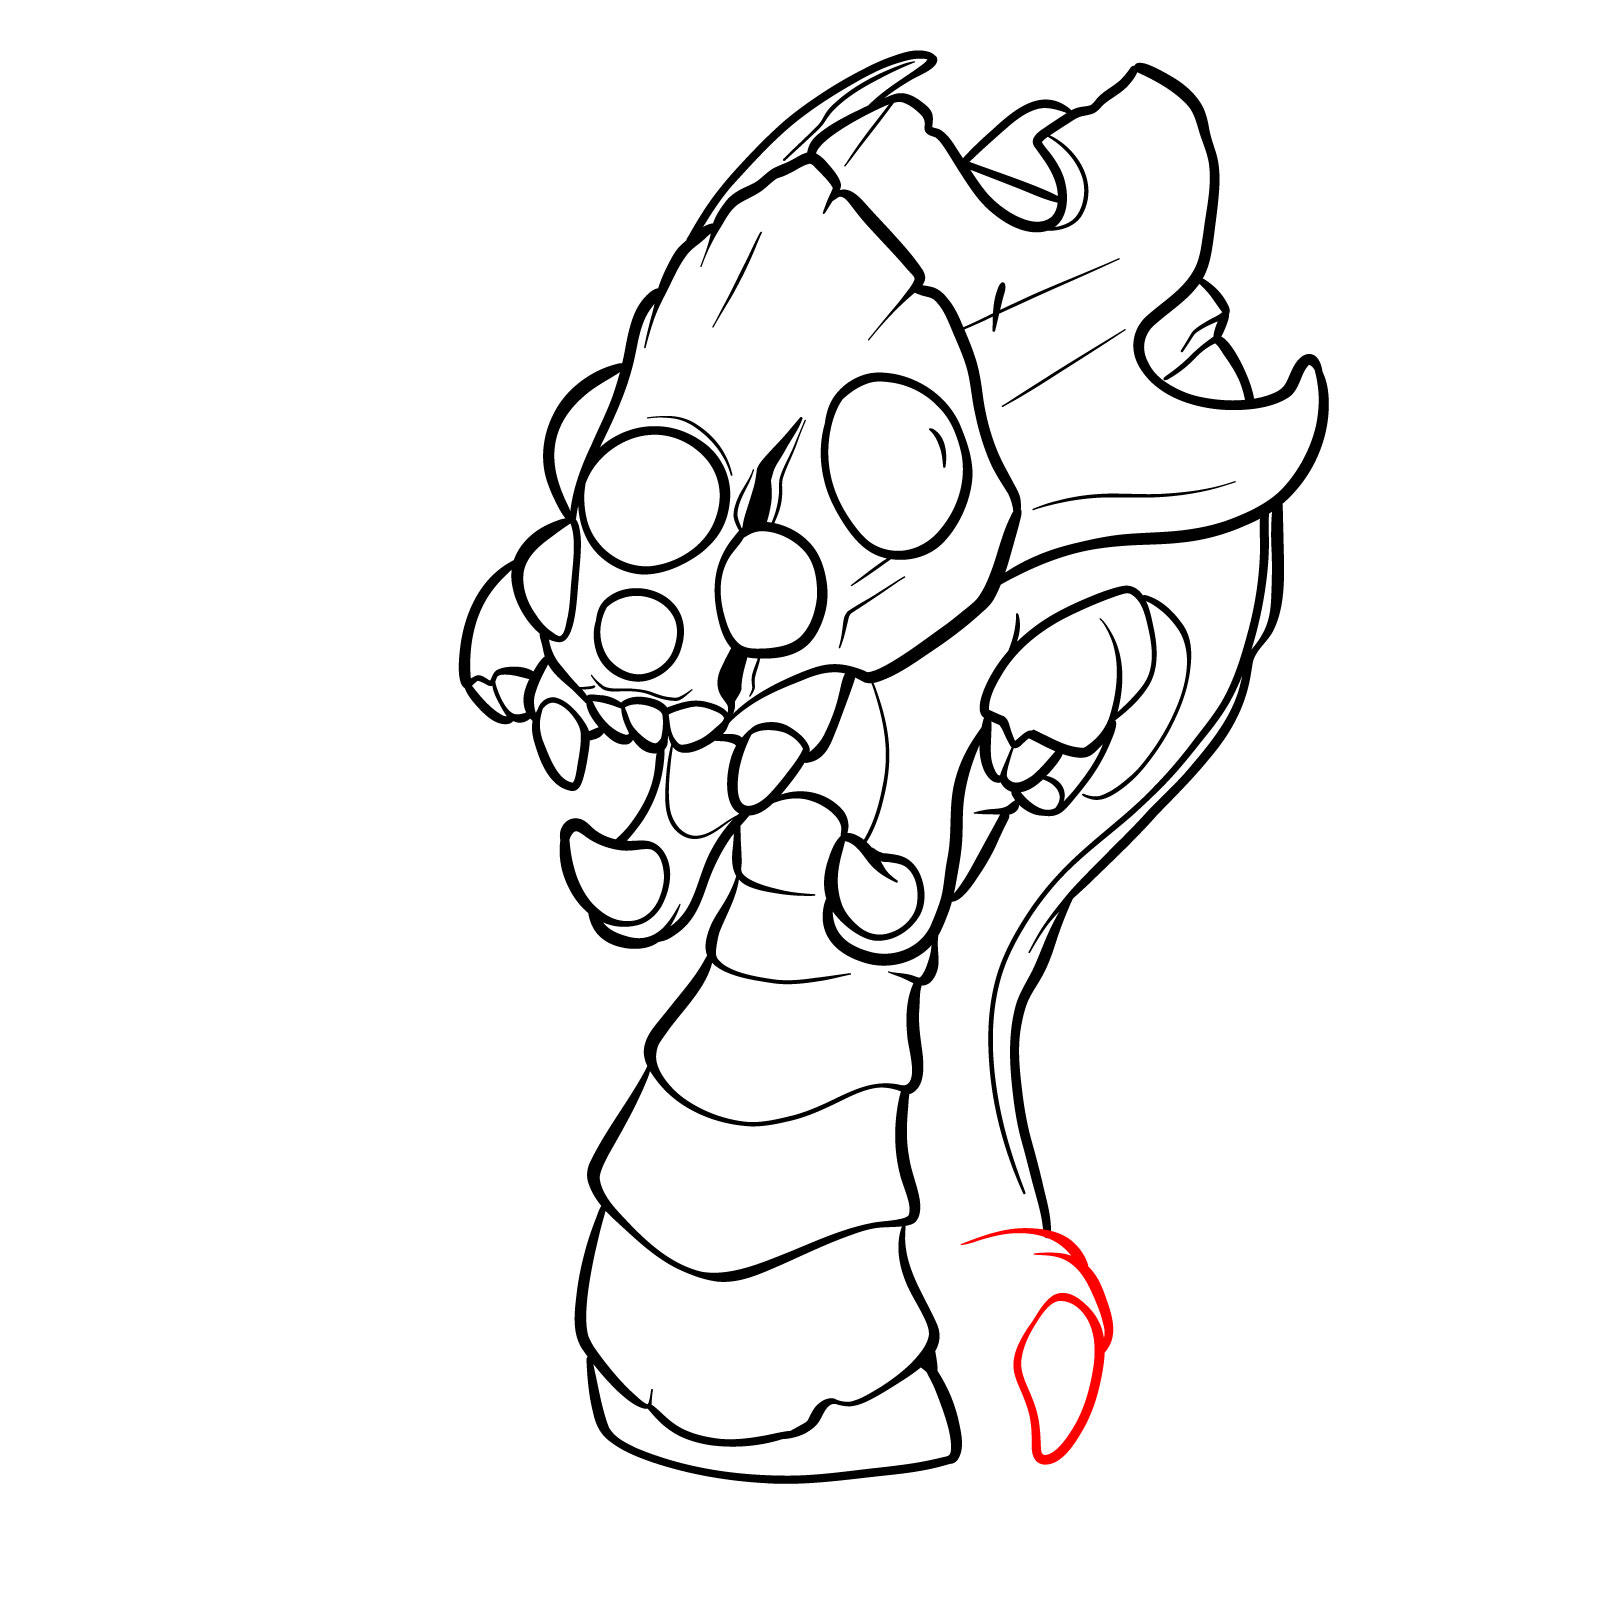 How to draw Baron Nashor from League of Legends - step 24